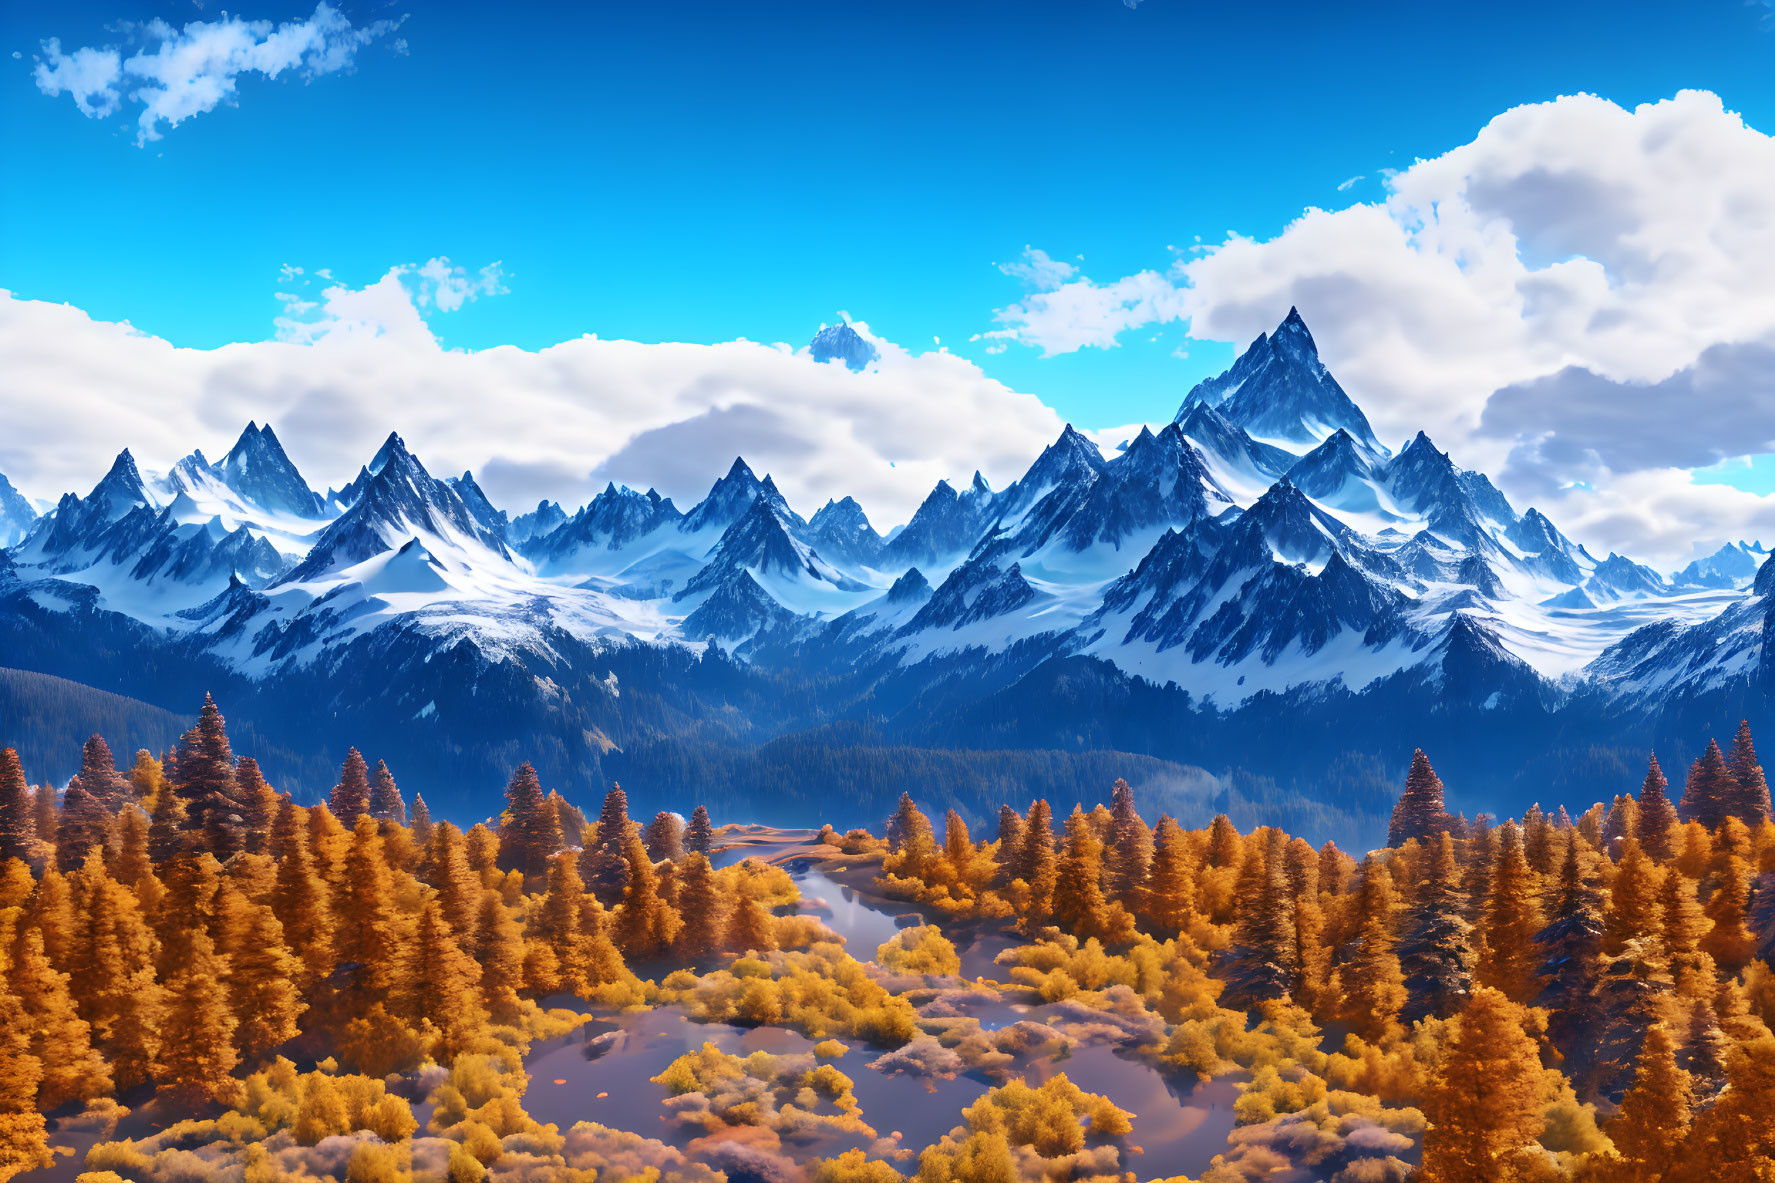 Snowy Peaks and Autumnal Forest Landscape under Blue Sky